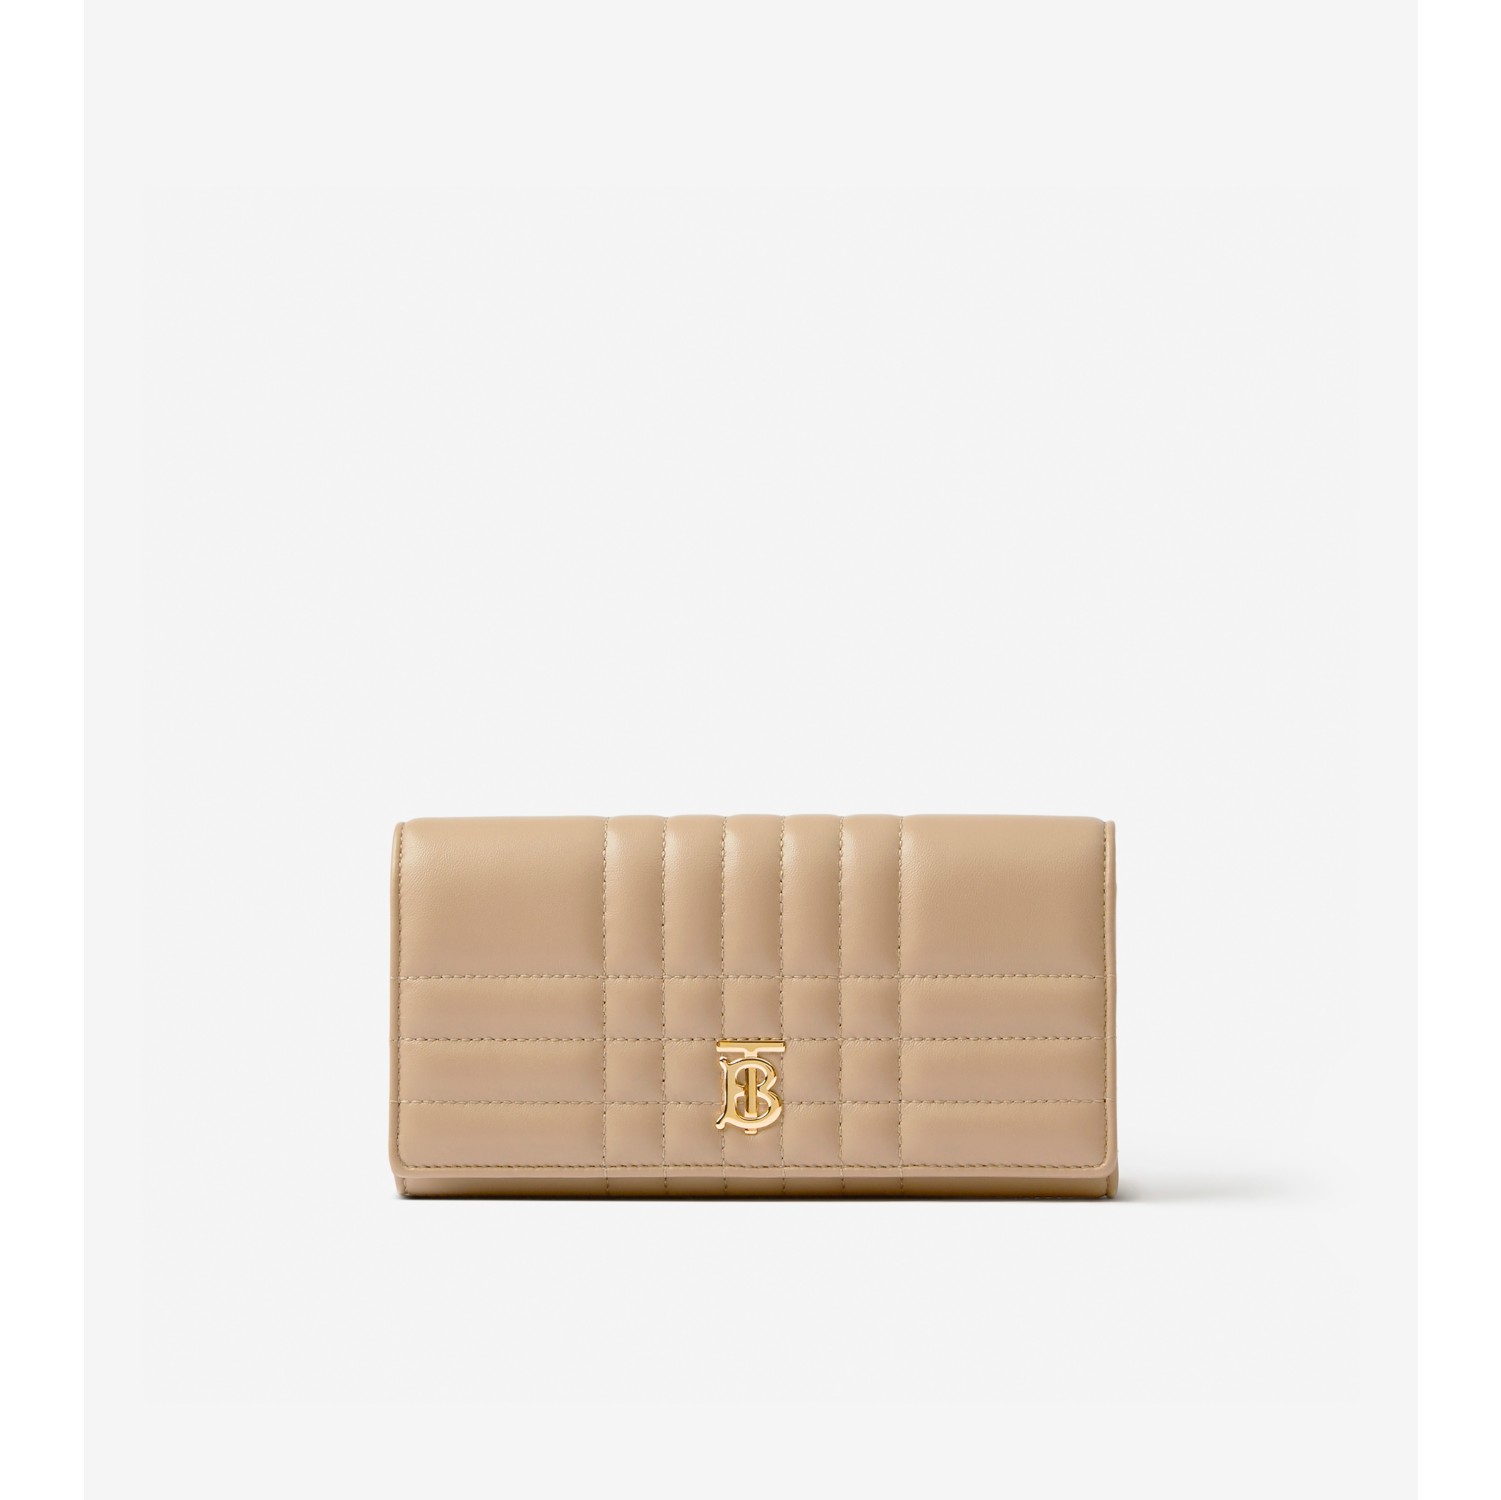 Burberry Quilted Leather Lola Card Holder